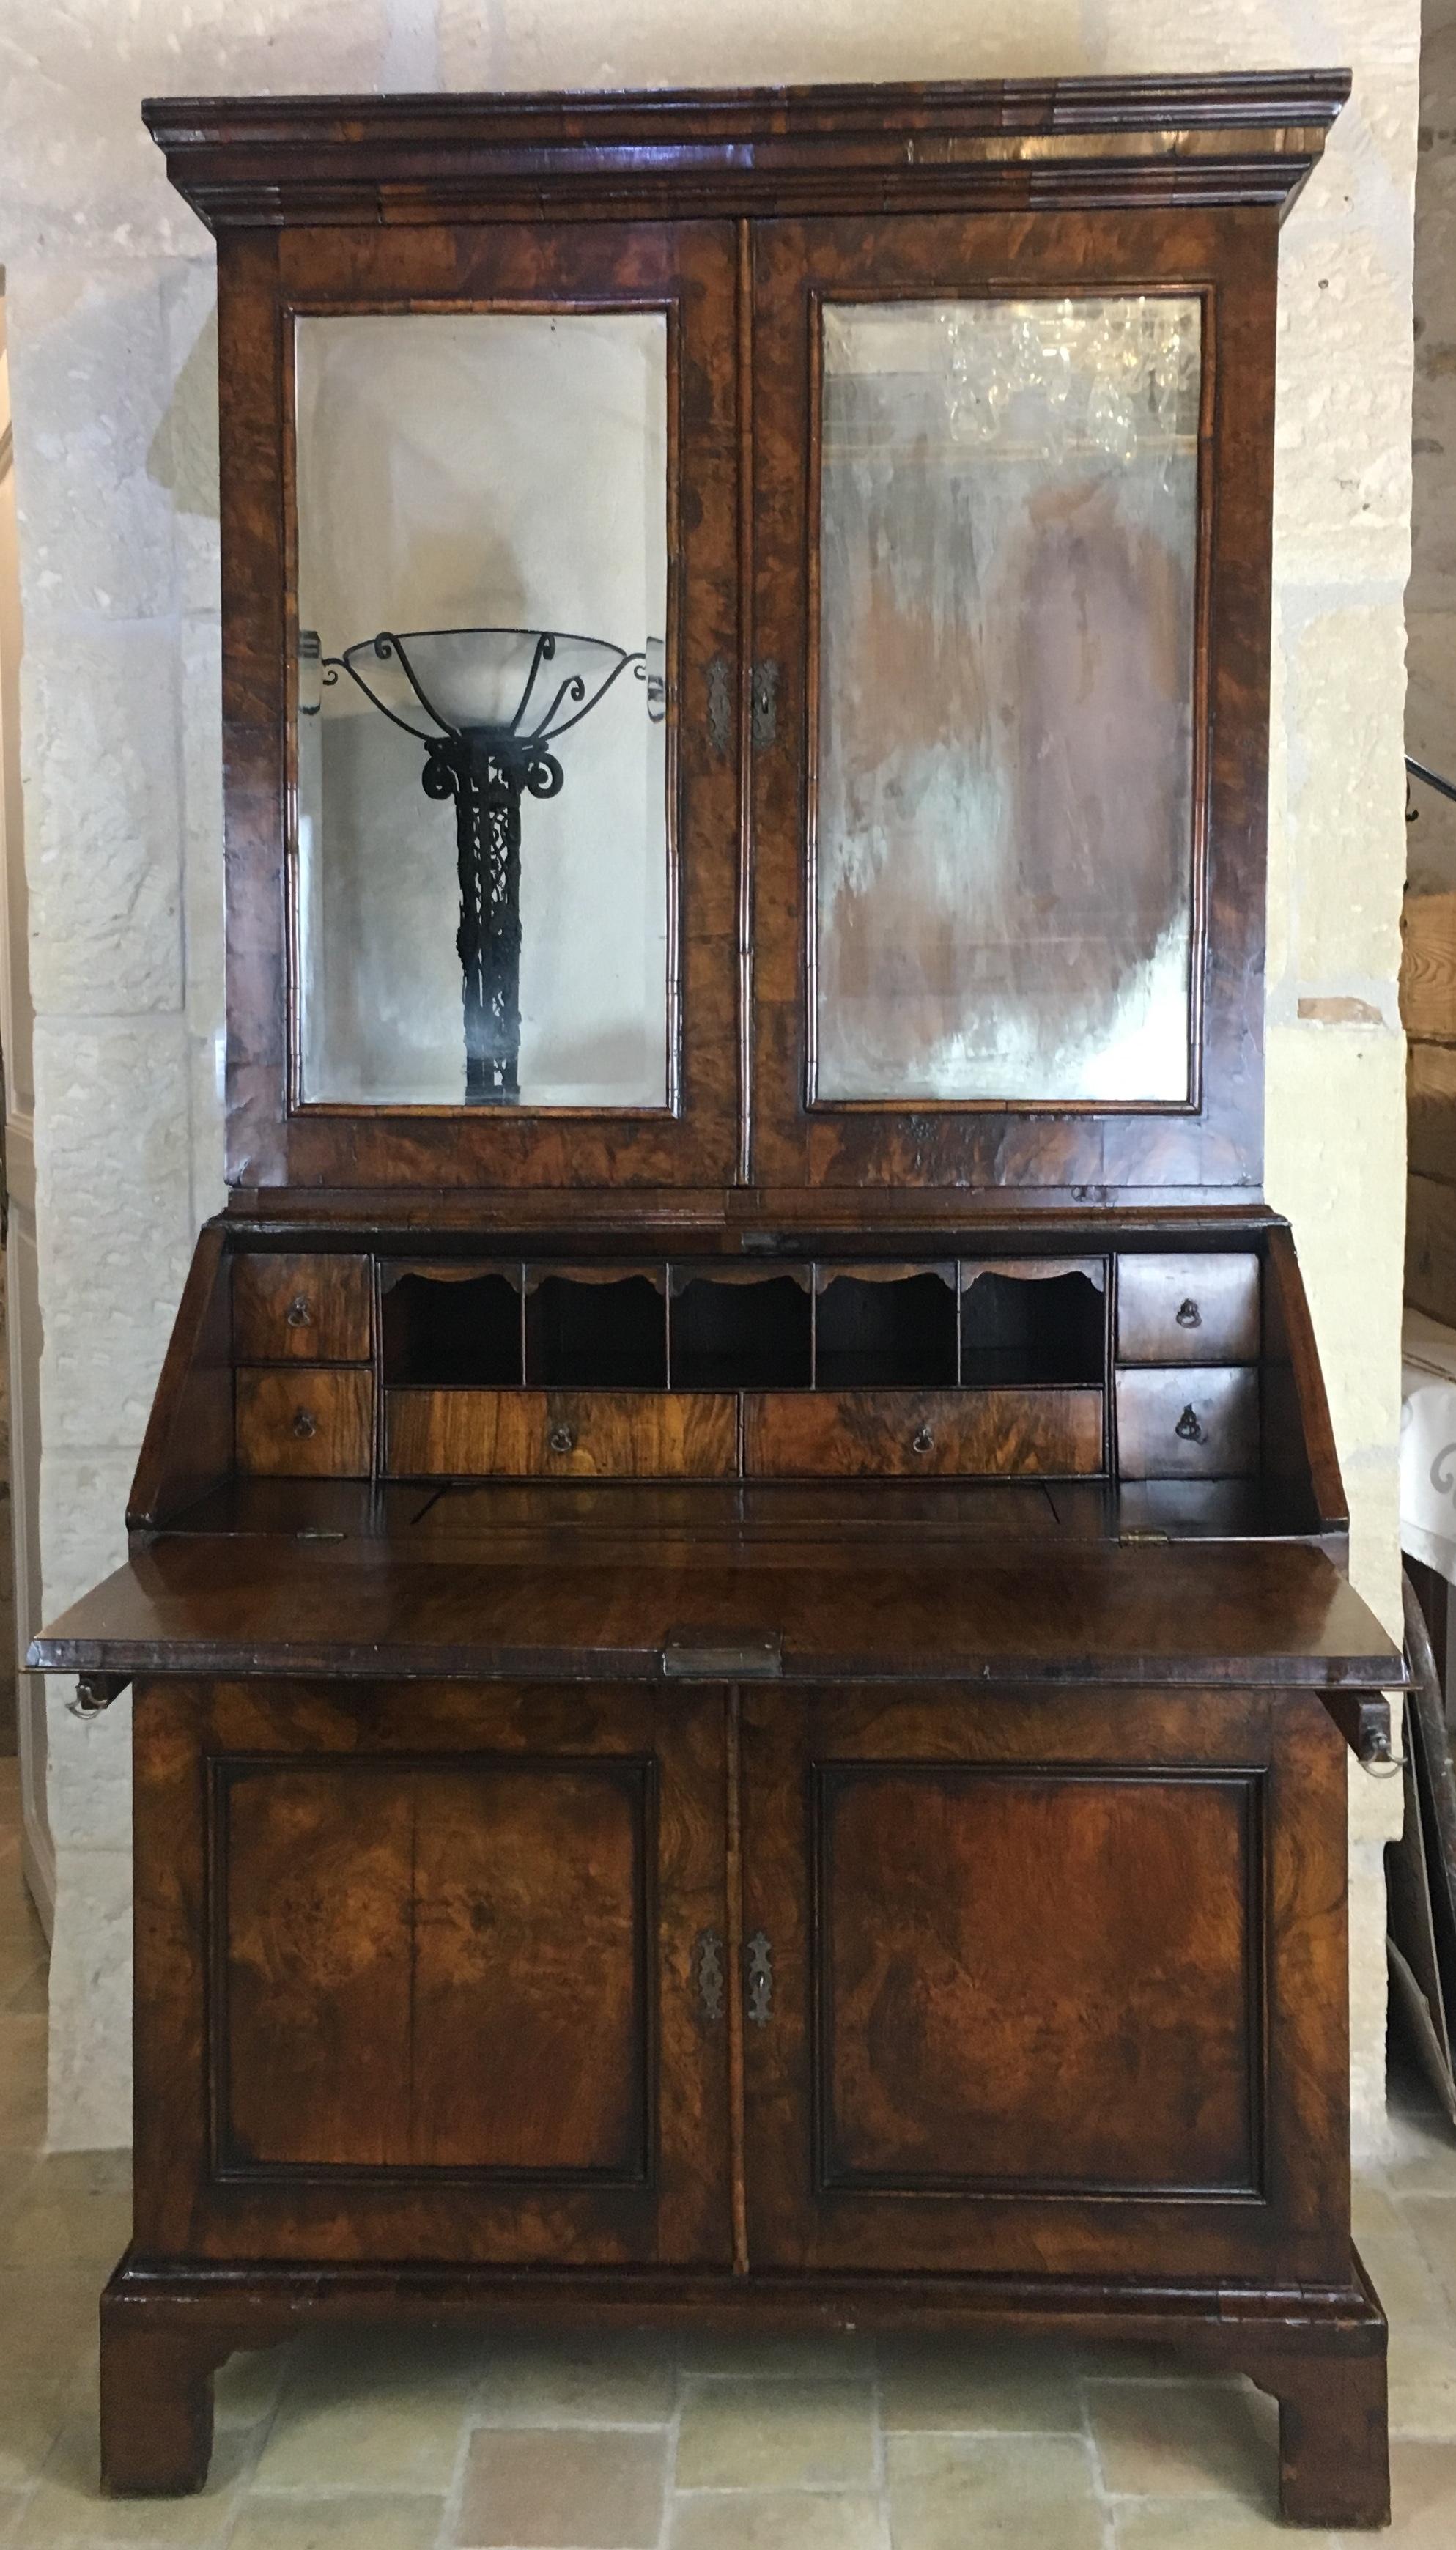 A fine 18th century English Queen Anne-period furnishings such as this walnut secretary are incredibly rare and important examples of English cabinetmaking, all original. This secretary is of the most outstanding calibre, boasting desirable double